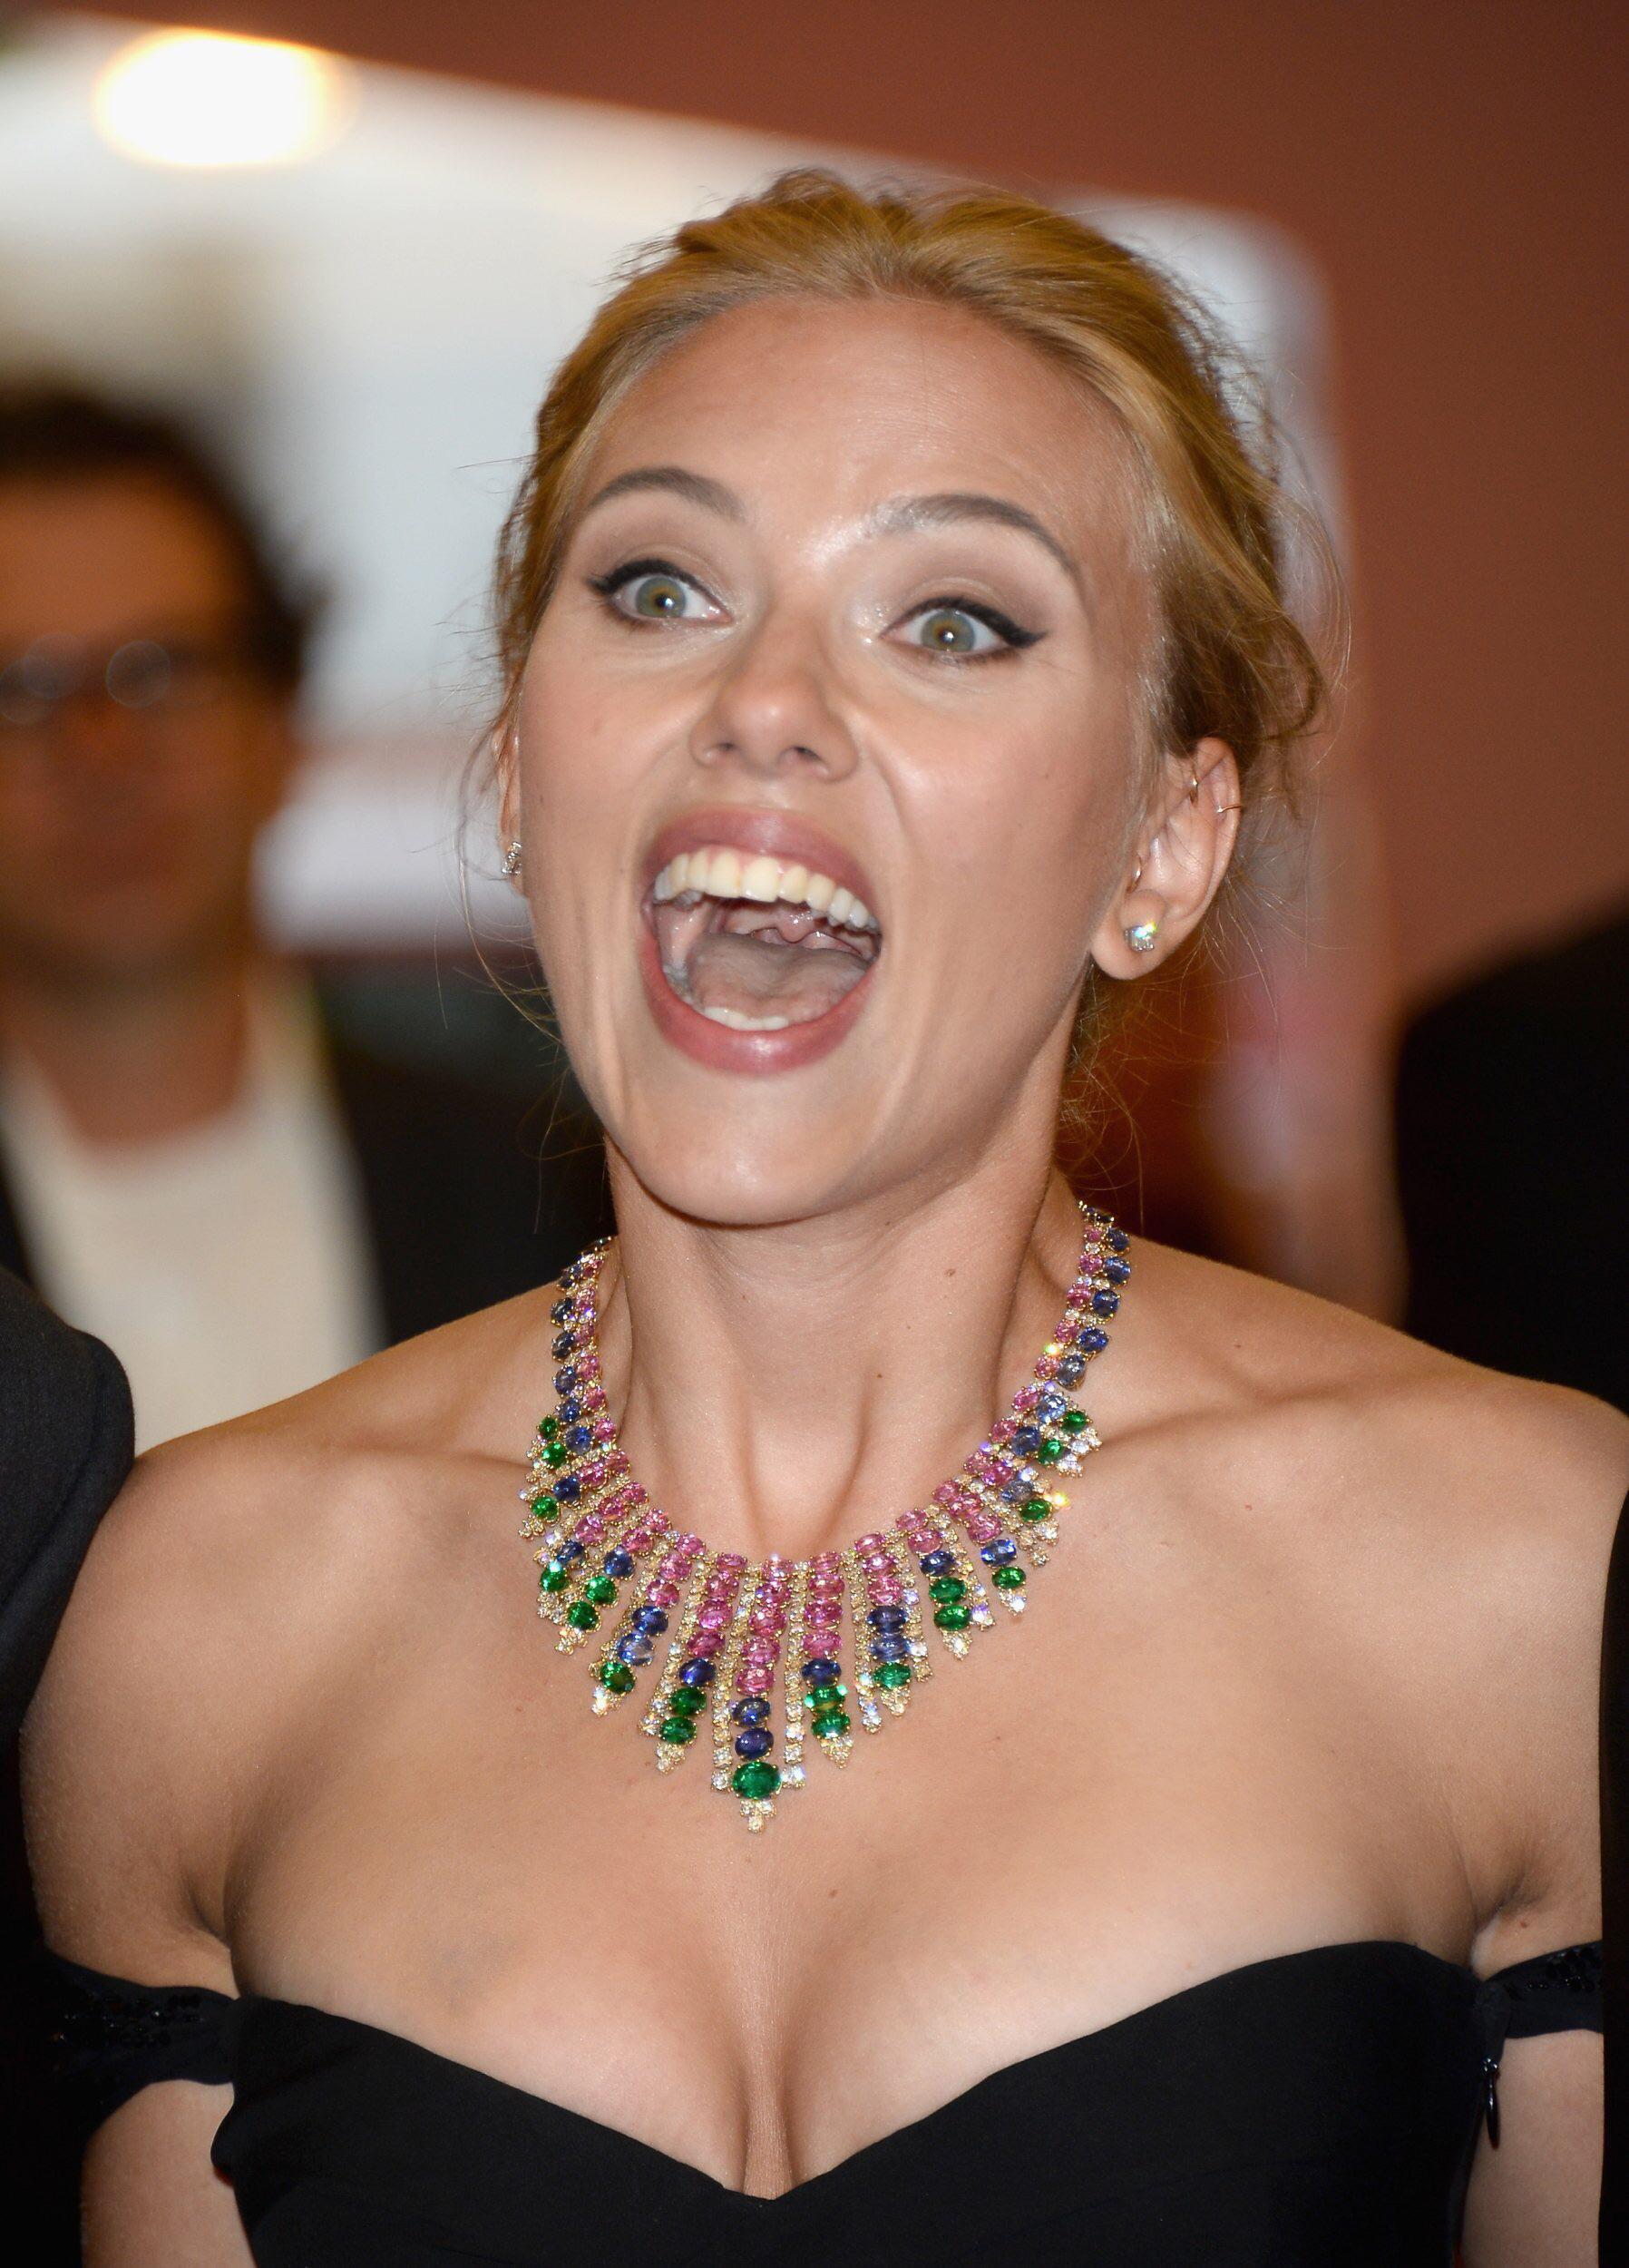 Scarlett Johansson with her mouth wide open